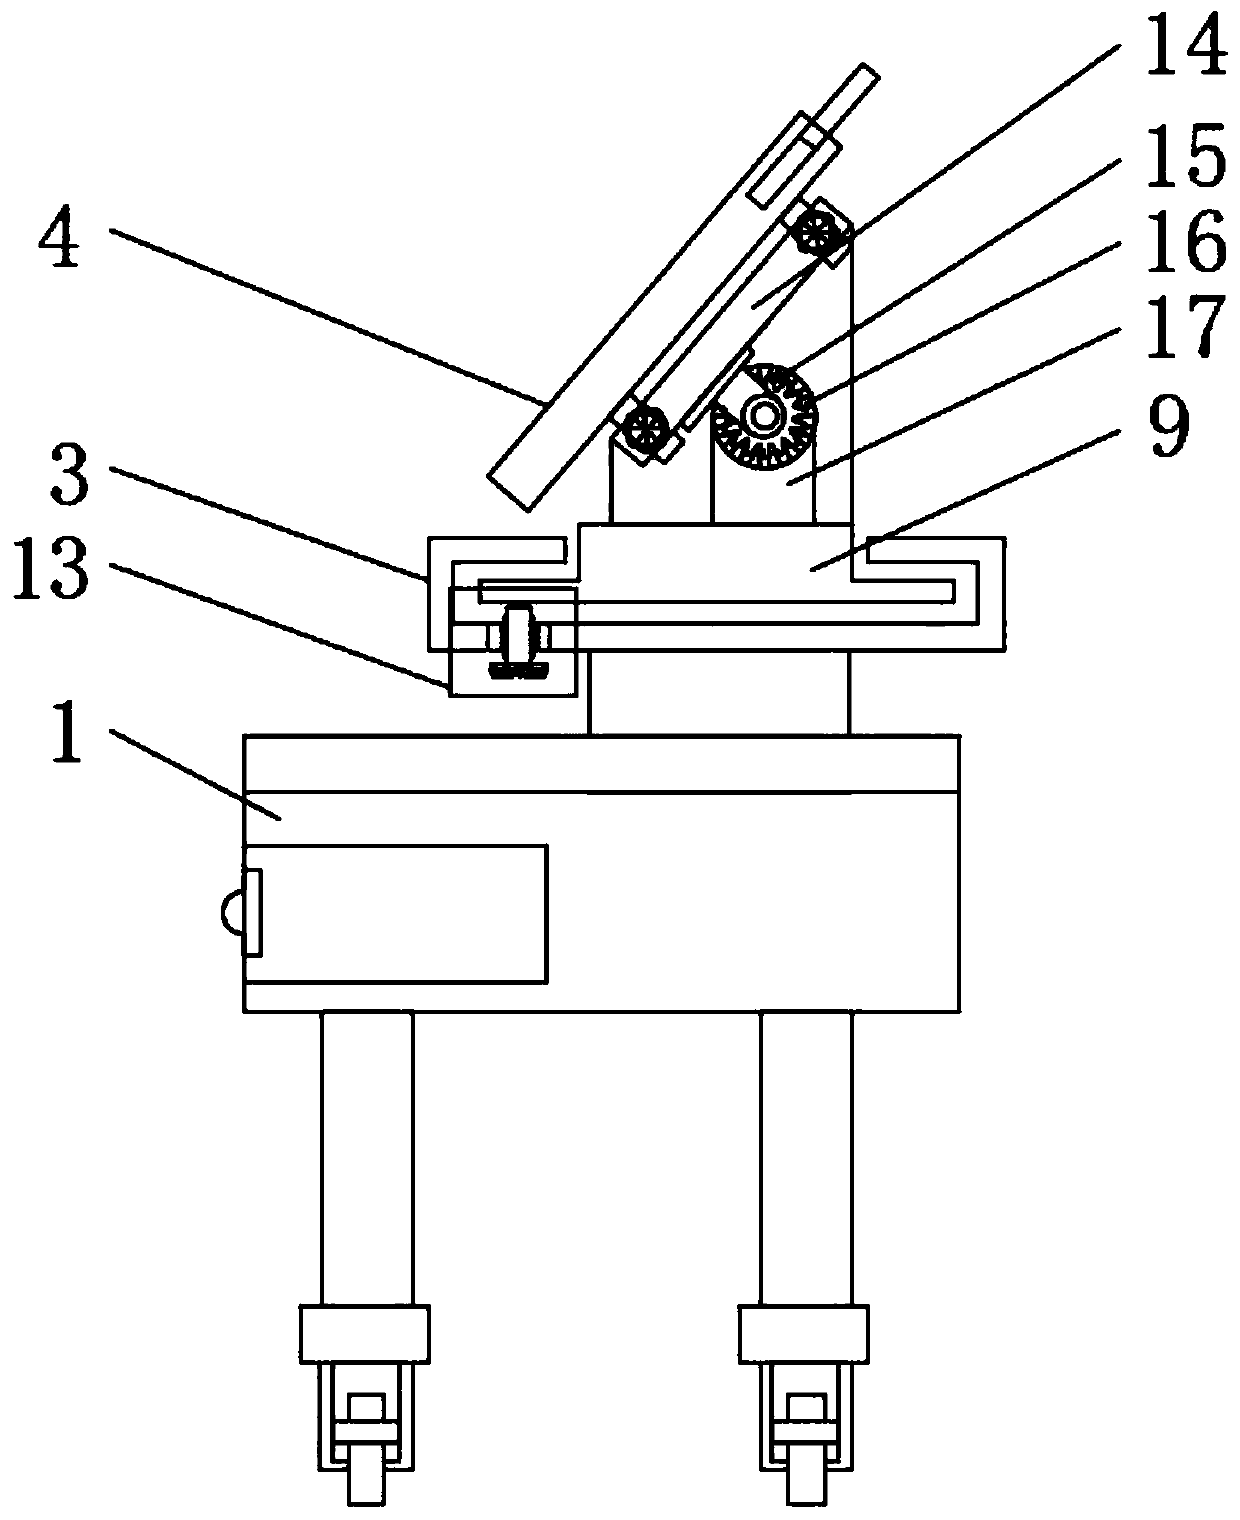 Supporting holder which is applied to animation design and has adjustable function